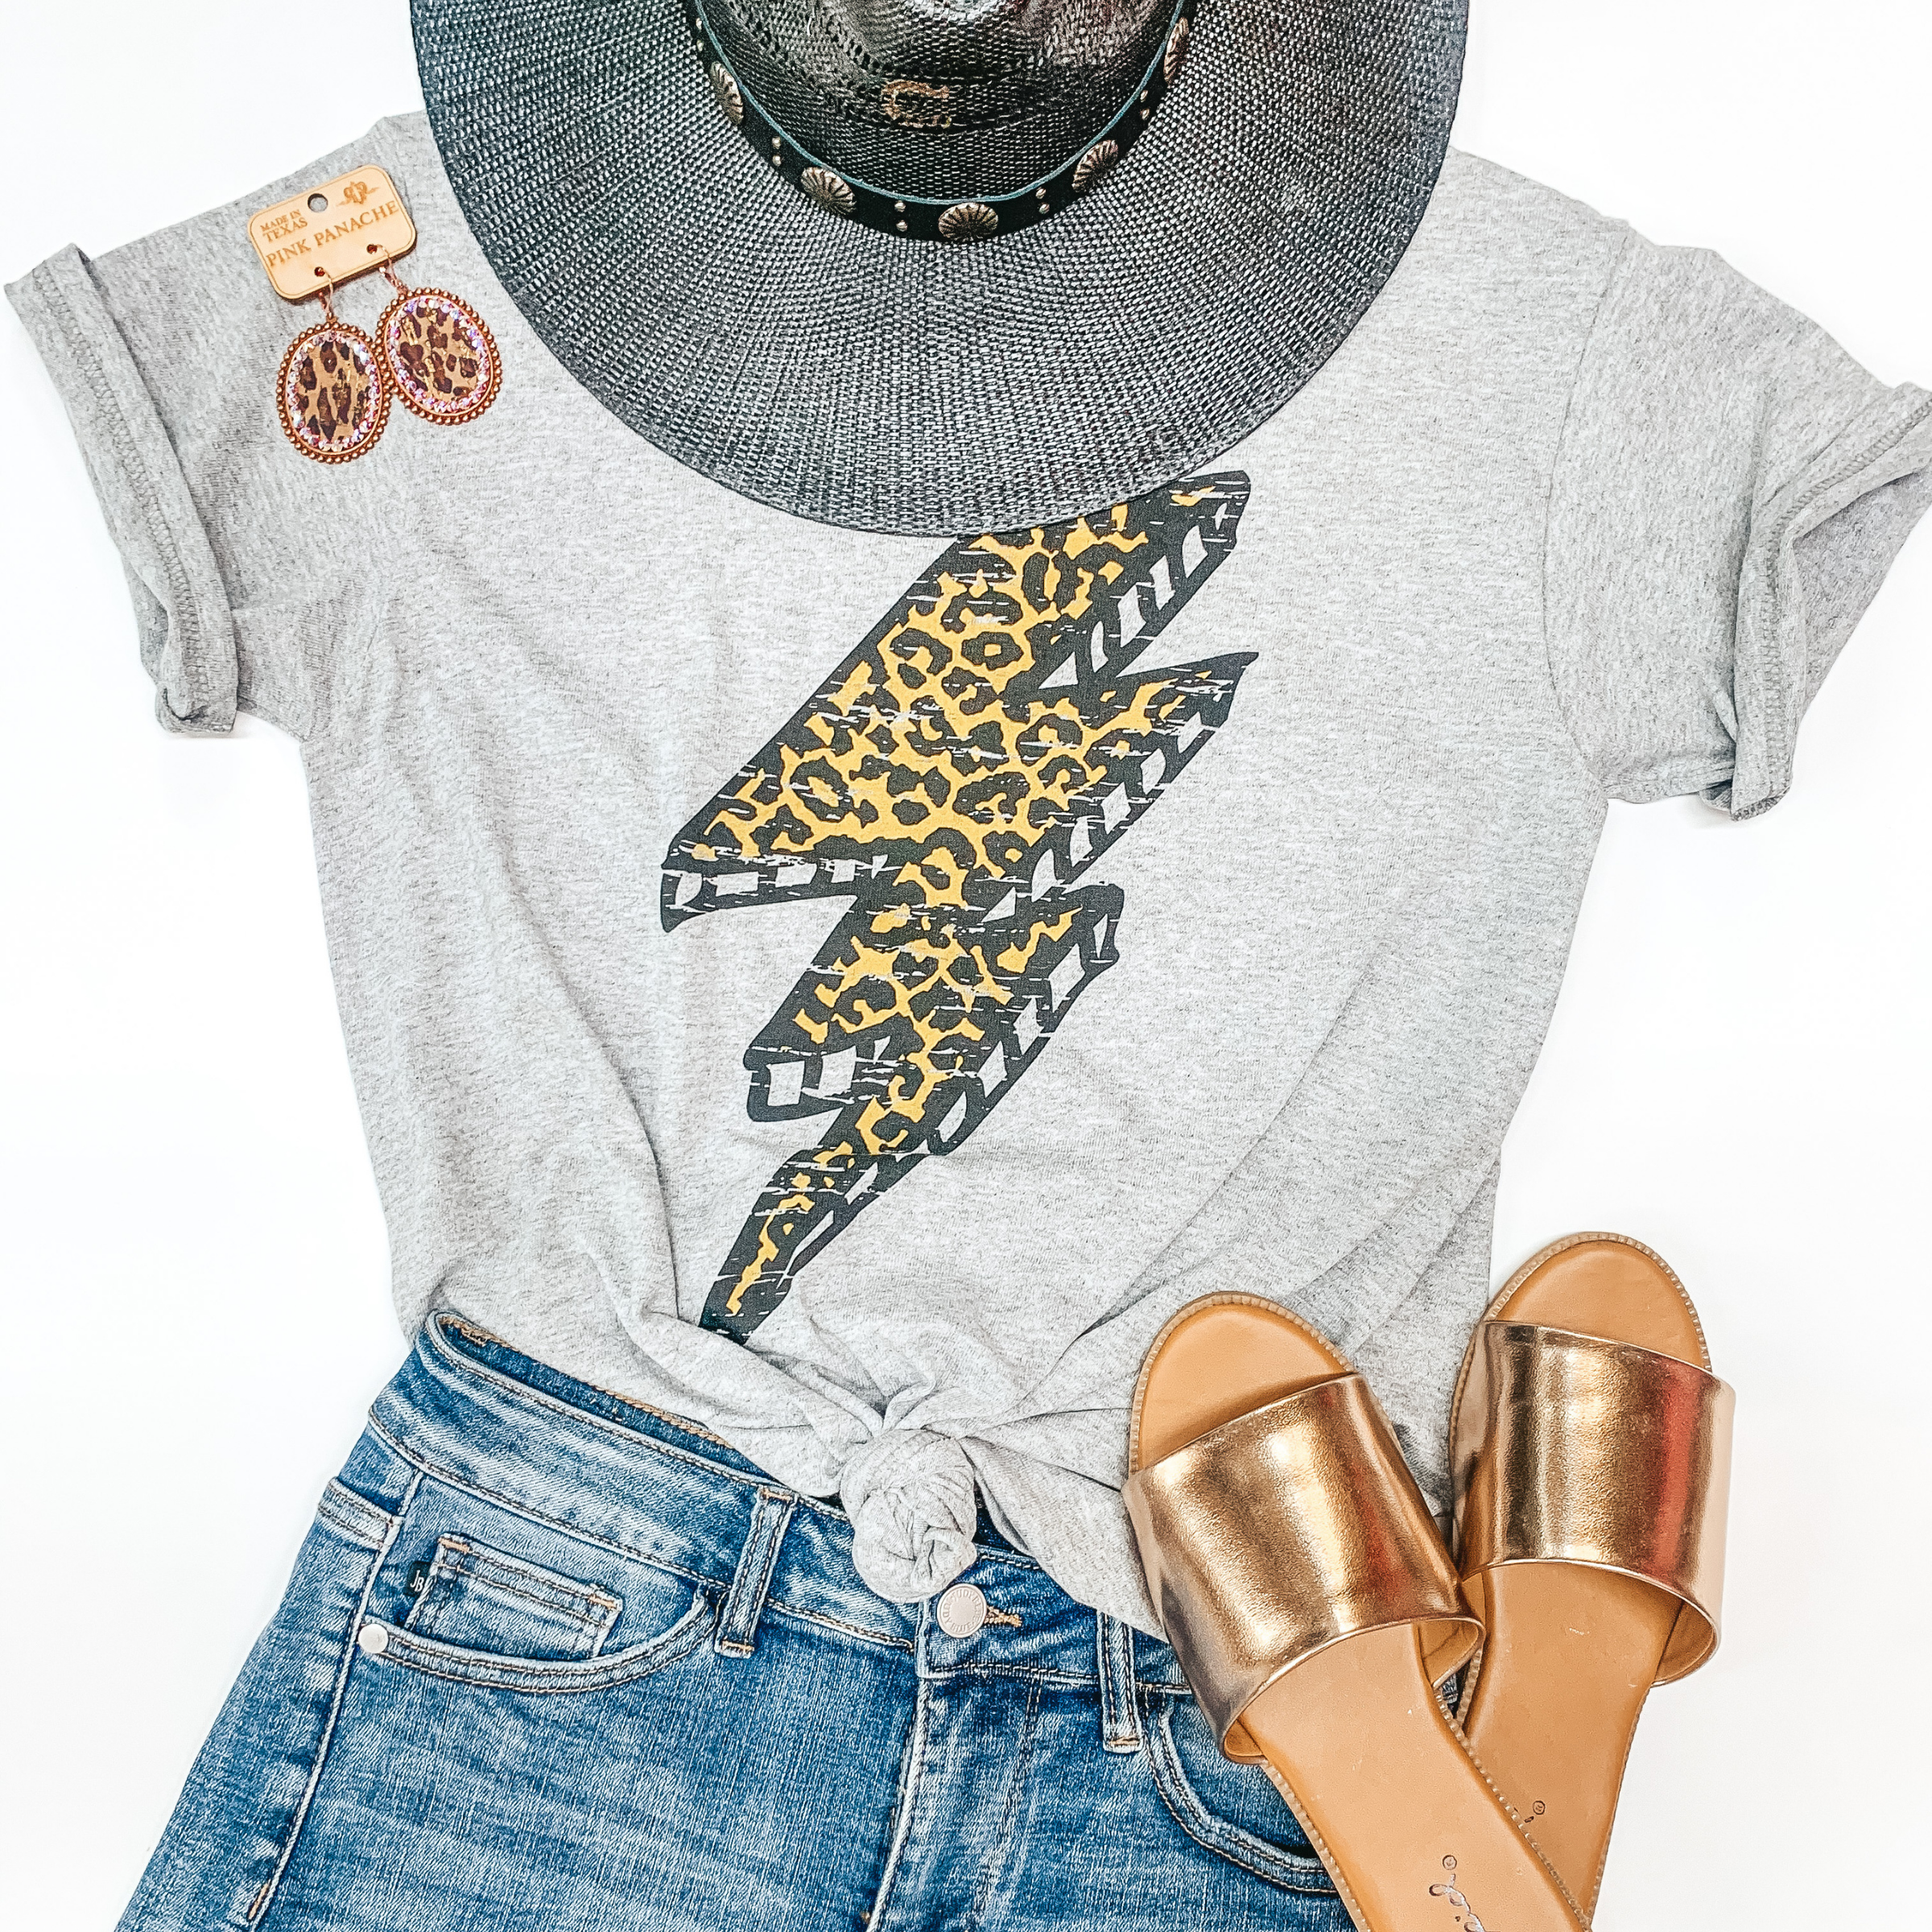 Wild Storm Leopard Lightning Bolt Short Sleeve Graphic Tee in Heather Grey - Giddy Up Glamour Boutique